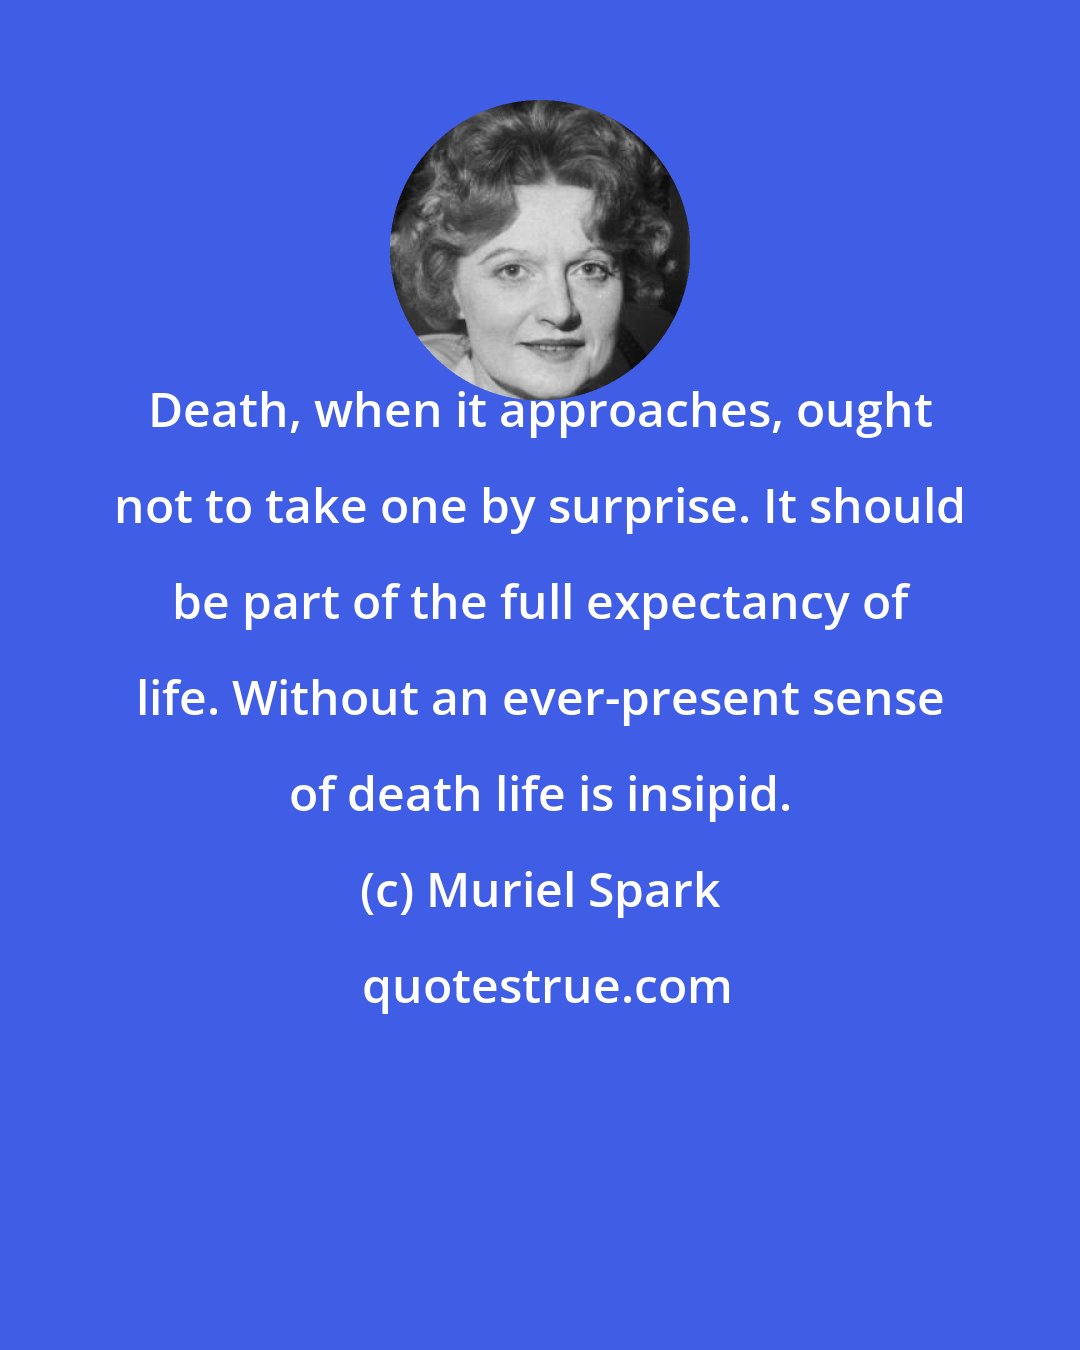 Muriel Spark: Death, when it approaches, ought not to take one by surprise. It should be part of the full expectancy of life. Without an ever-present sense of death life is insipid.